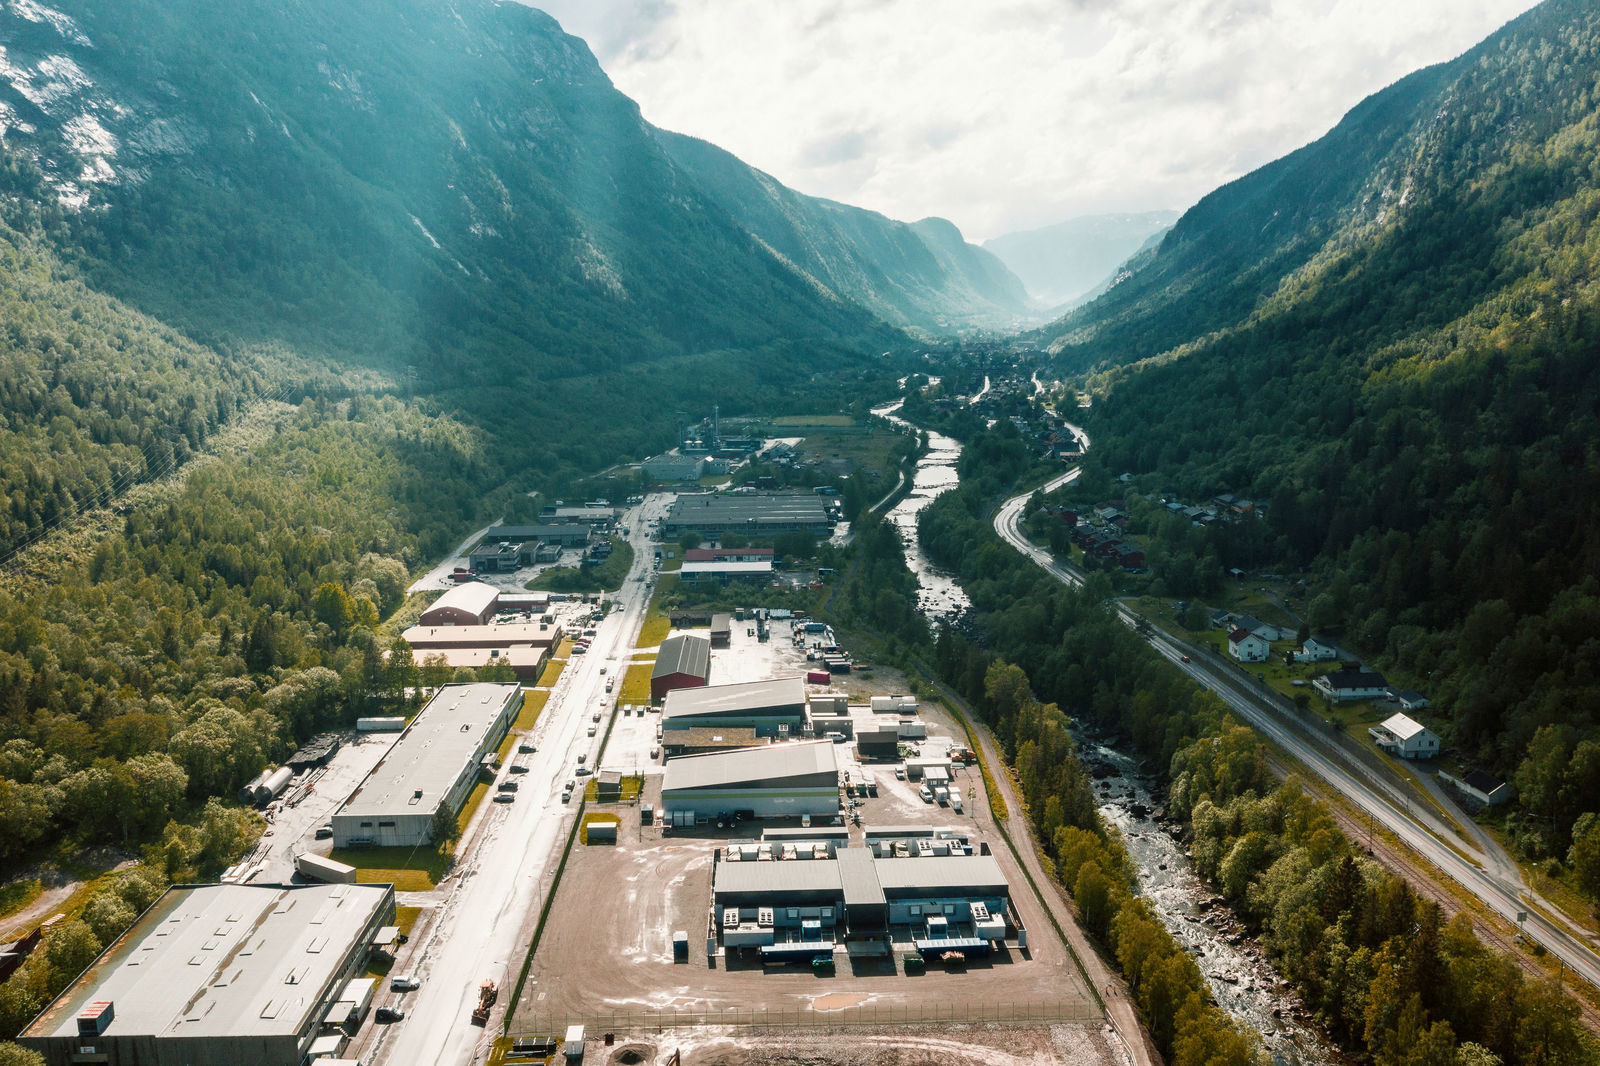 Green Computing Performance: Volkswagen opens carbon neutral data center in Norway